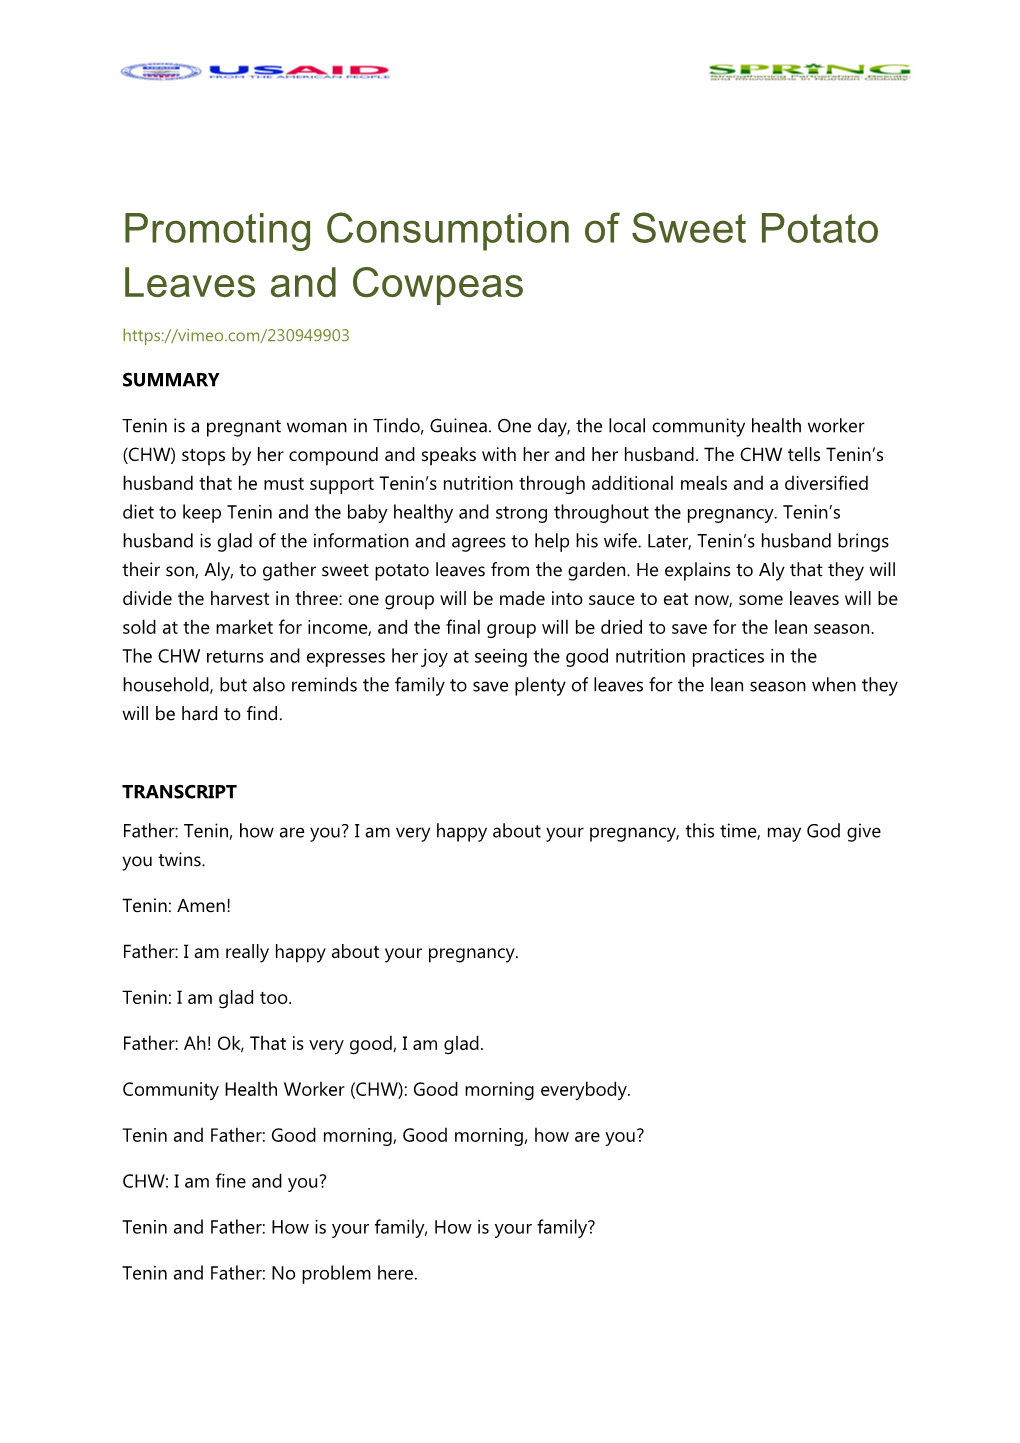 Promoting Consumption of Sweet Potato Leaves and Cowpeas